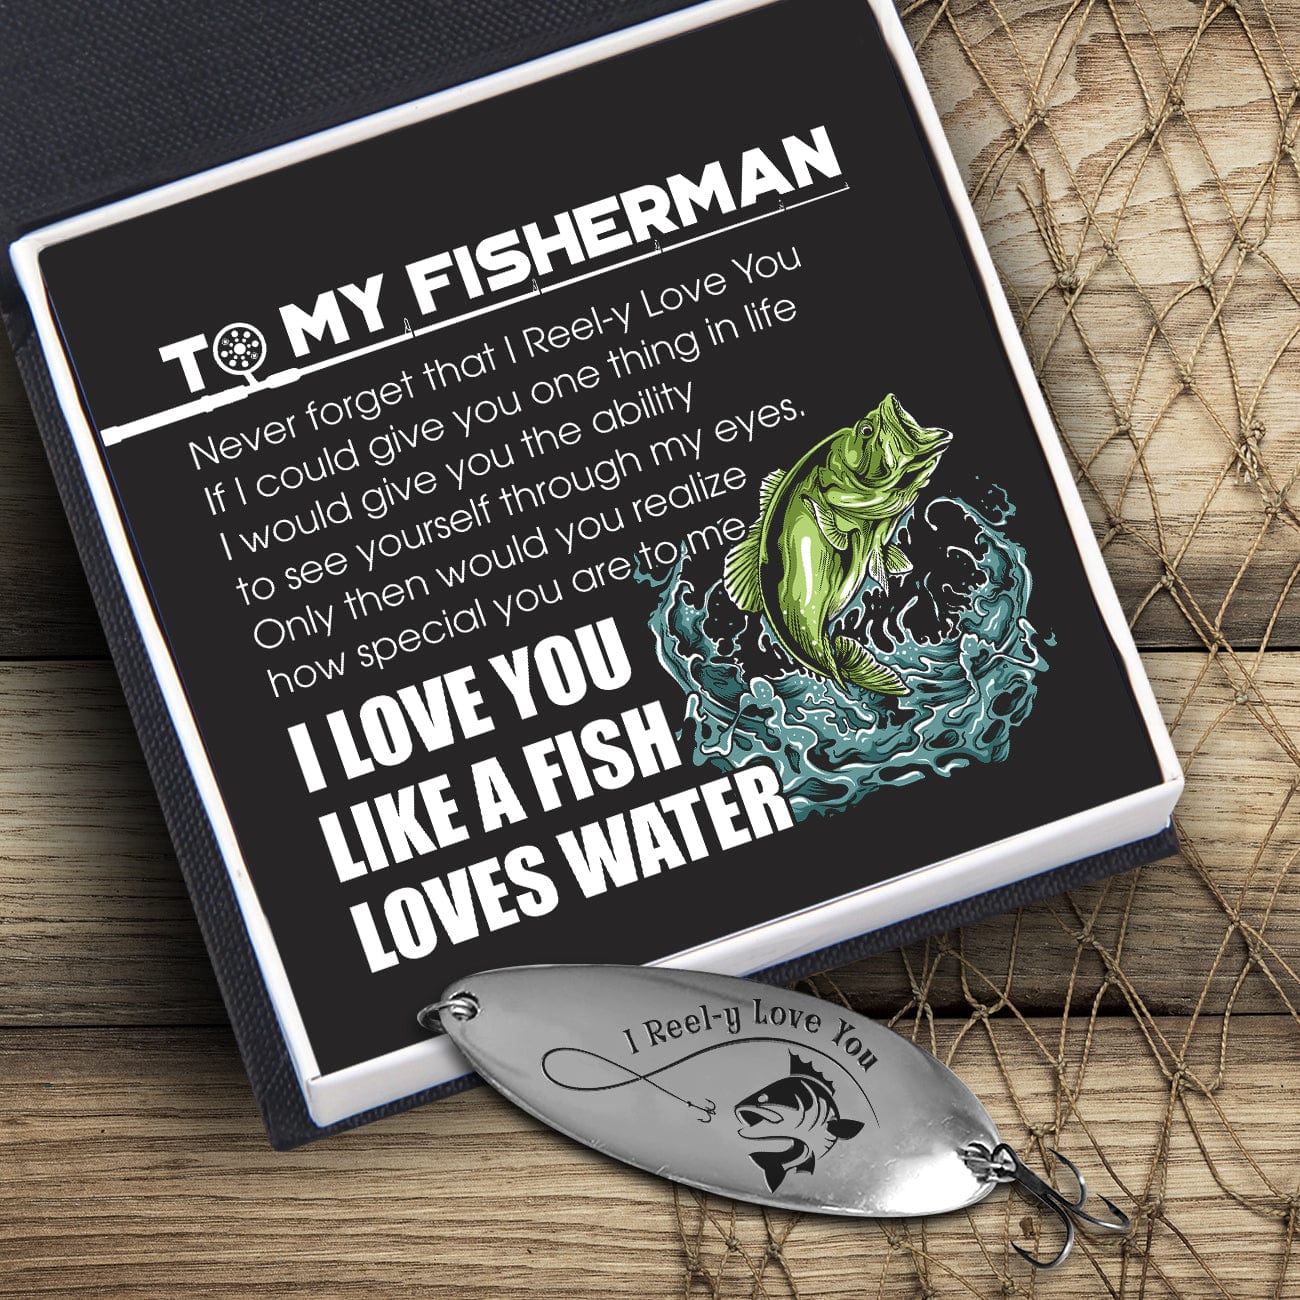 Fishing Lure - Fishing - To My Fisherman - Never Forget That I Reel-y Love You - Gfb26003